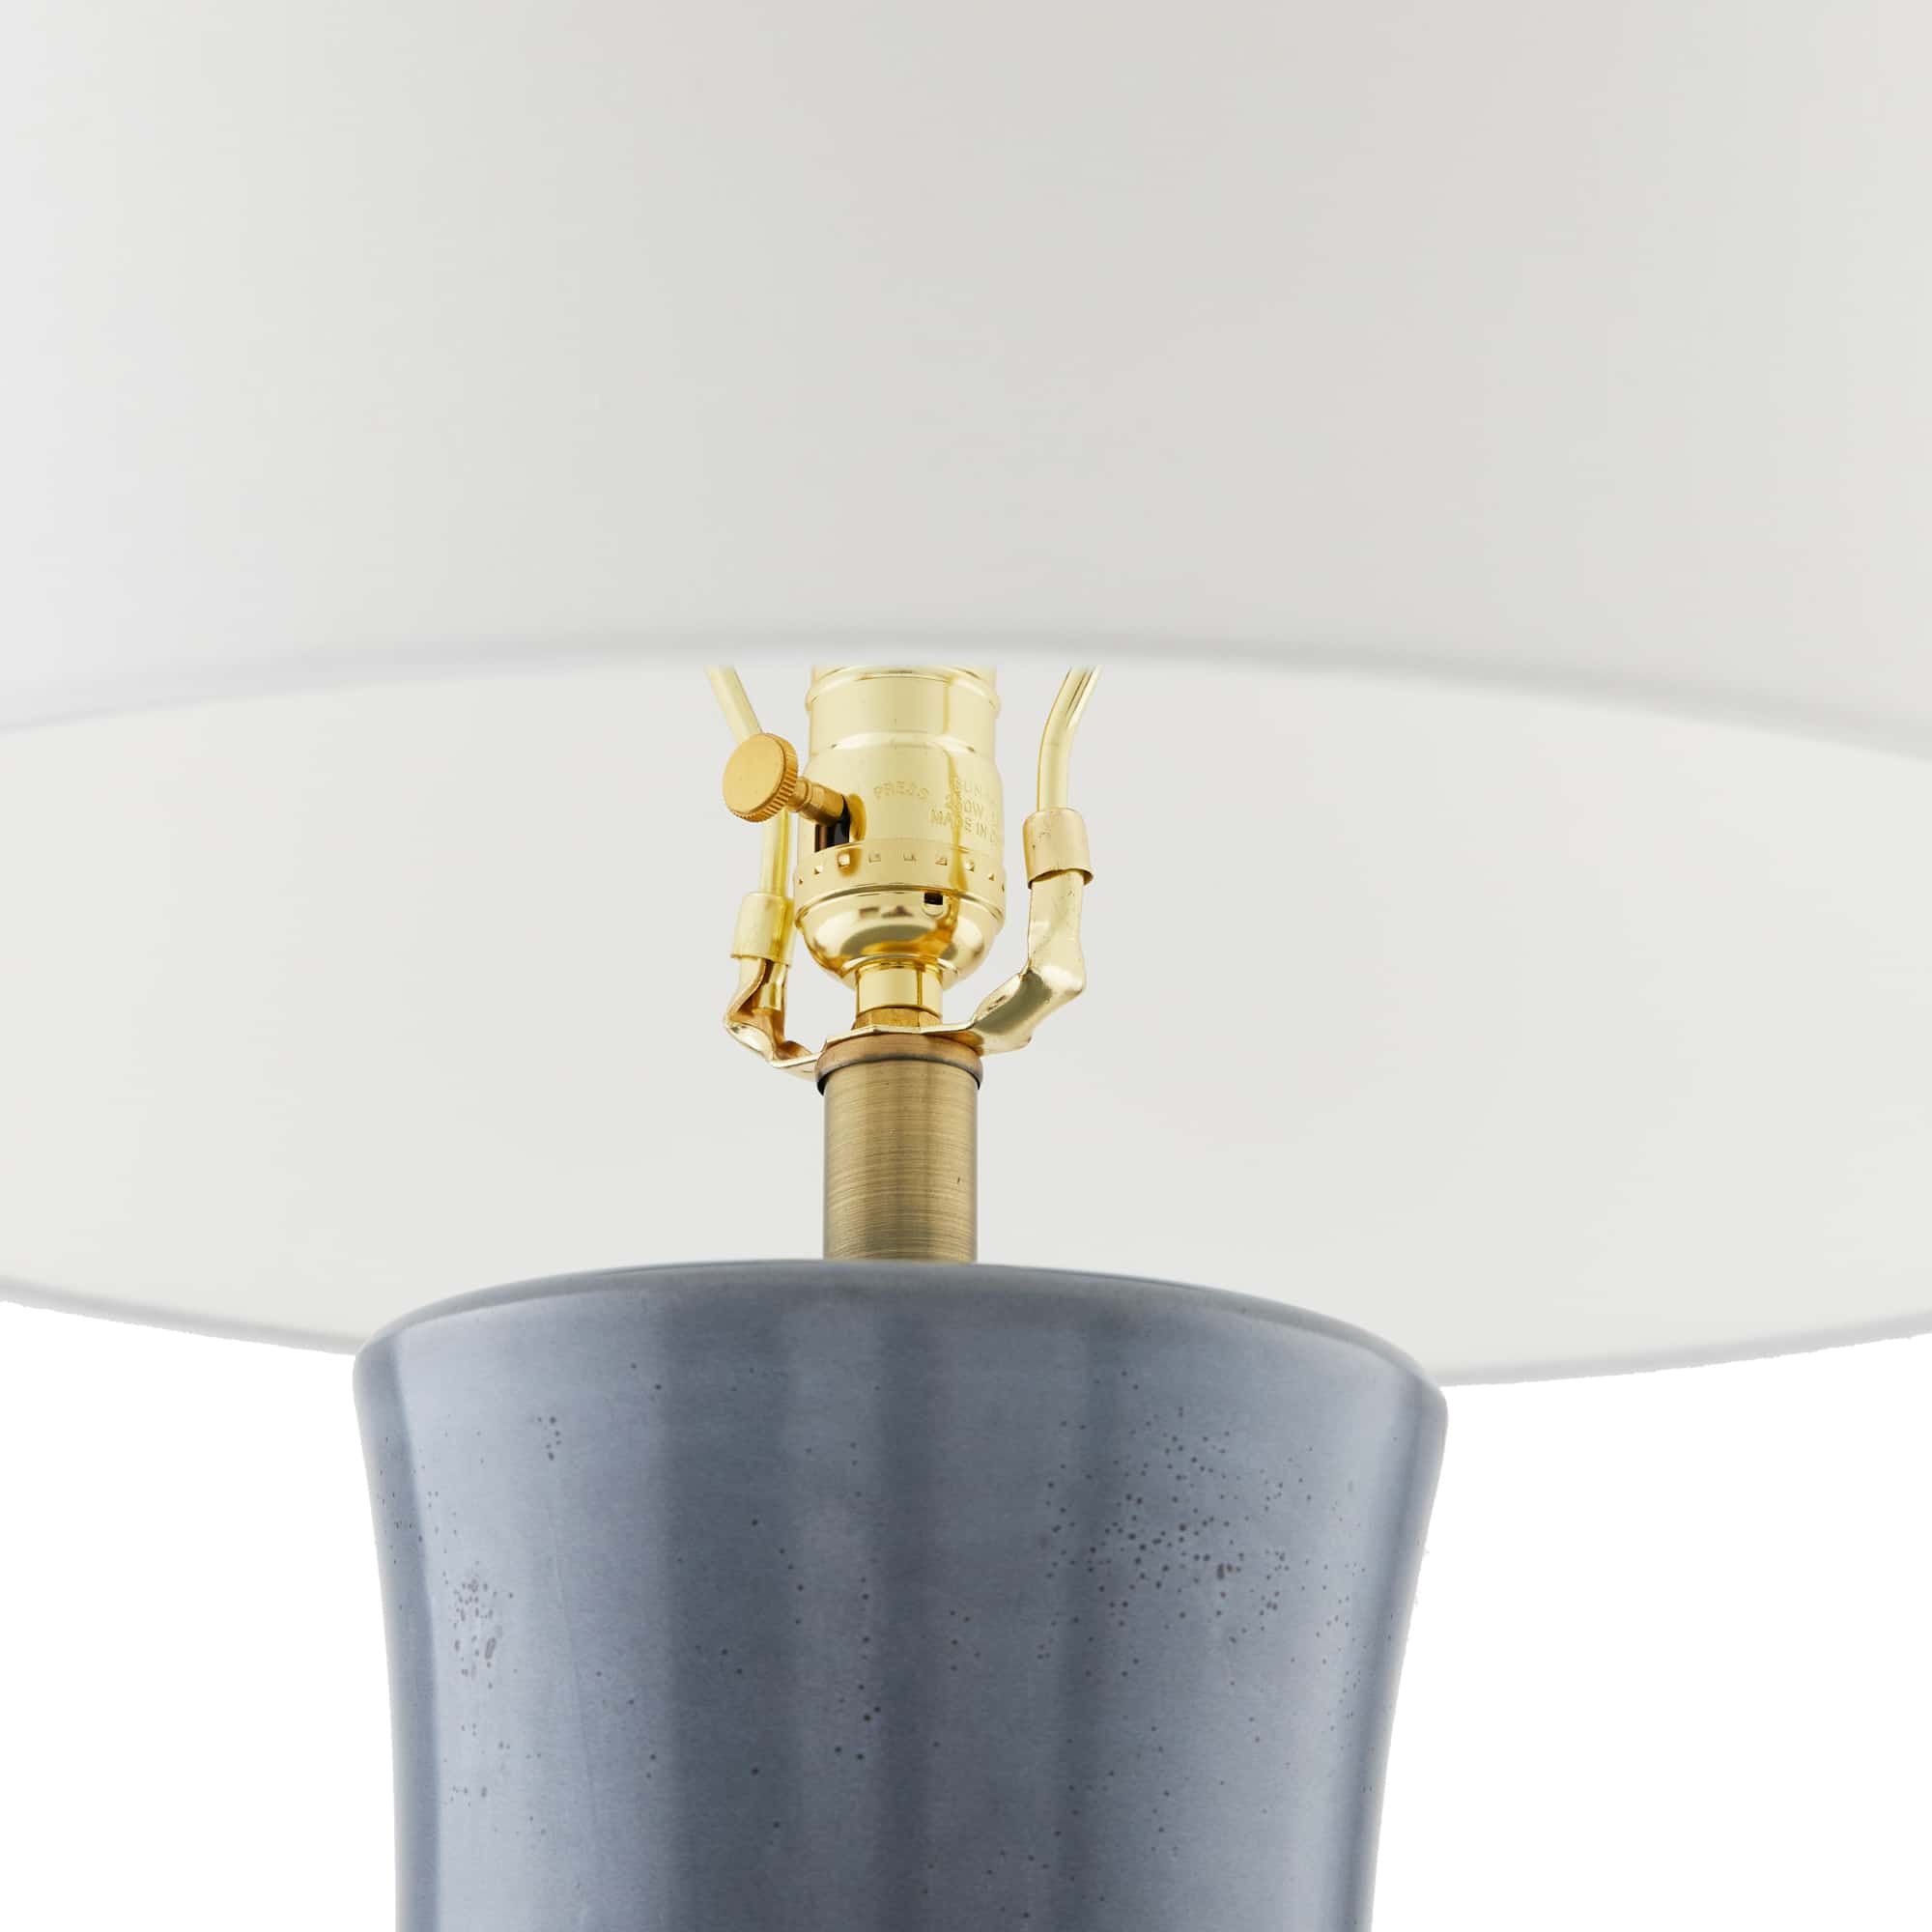 PISCES by Arteriors Table Lamp